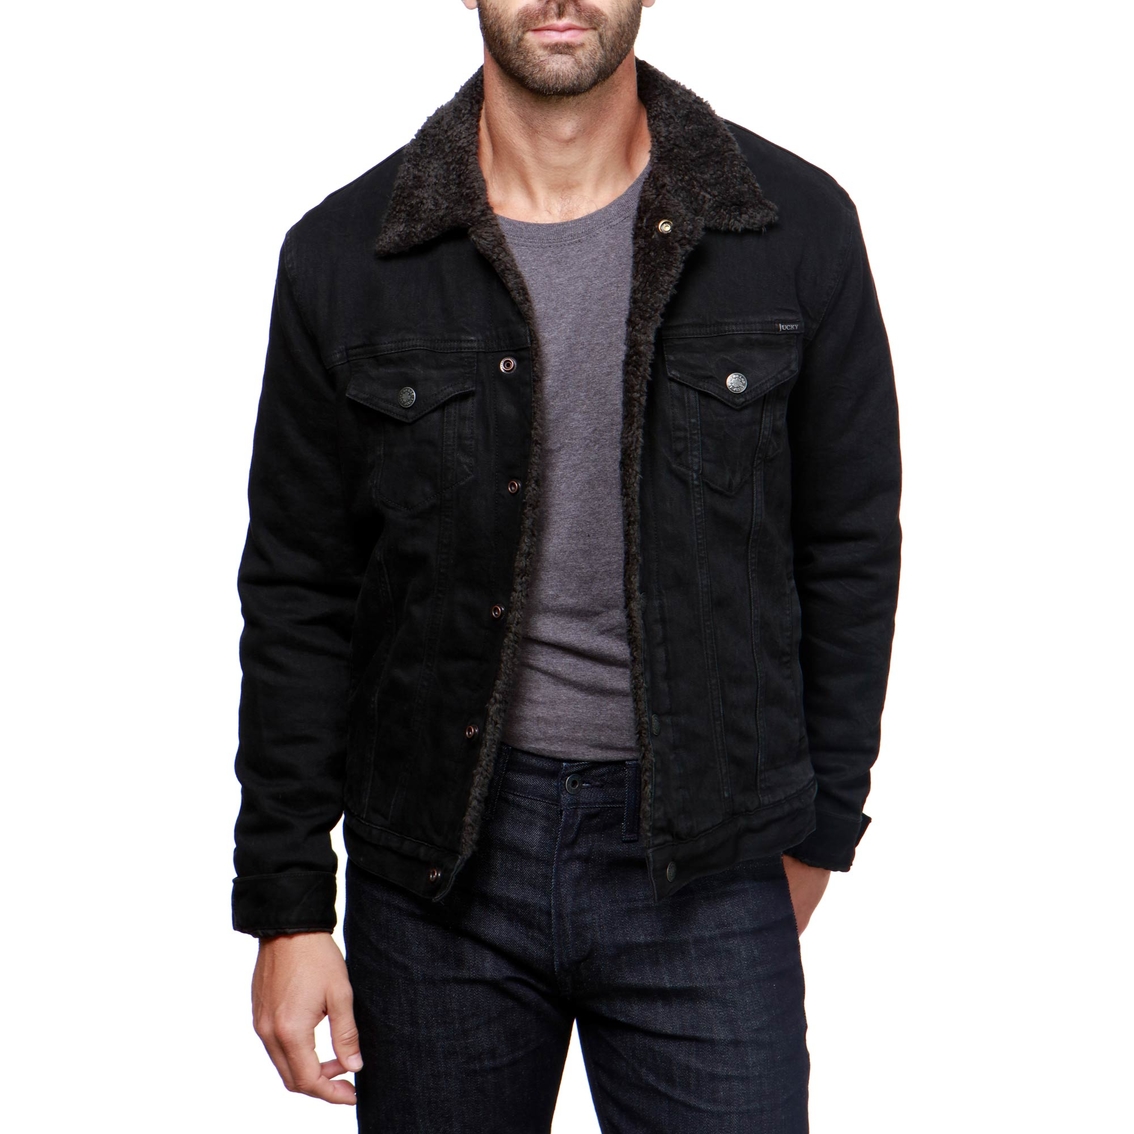 Lucky Brand Lakewood Denim Sherpa Jacket, Jackets, Clothing & Accessories